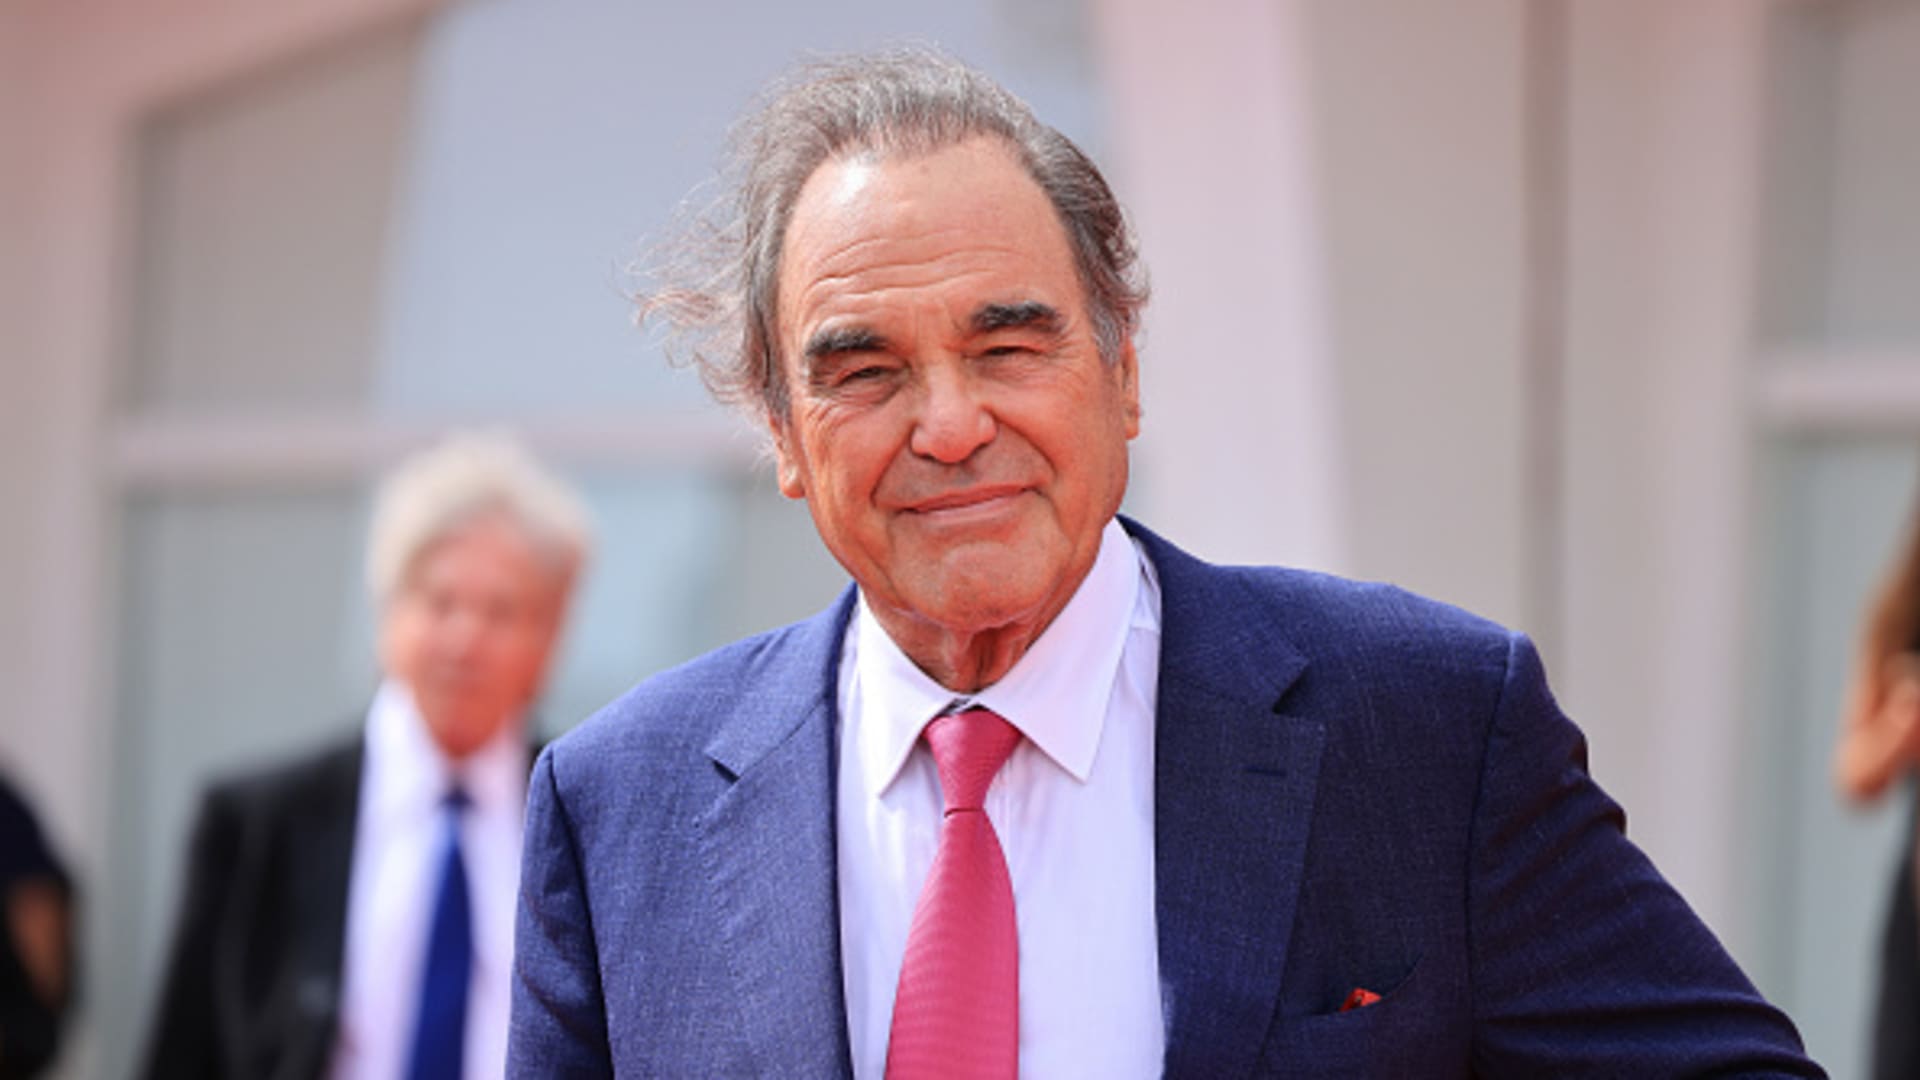 Oliver Stone's new movie makes the case nuclear power is the obvious solution to climate change